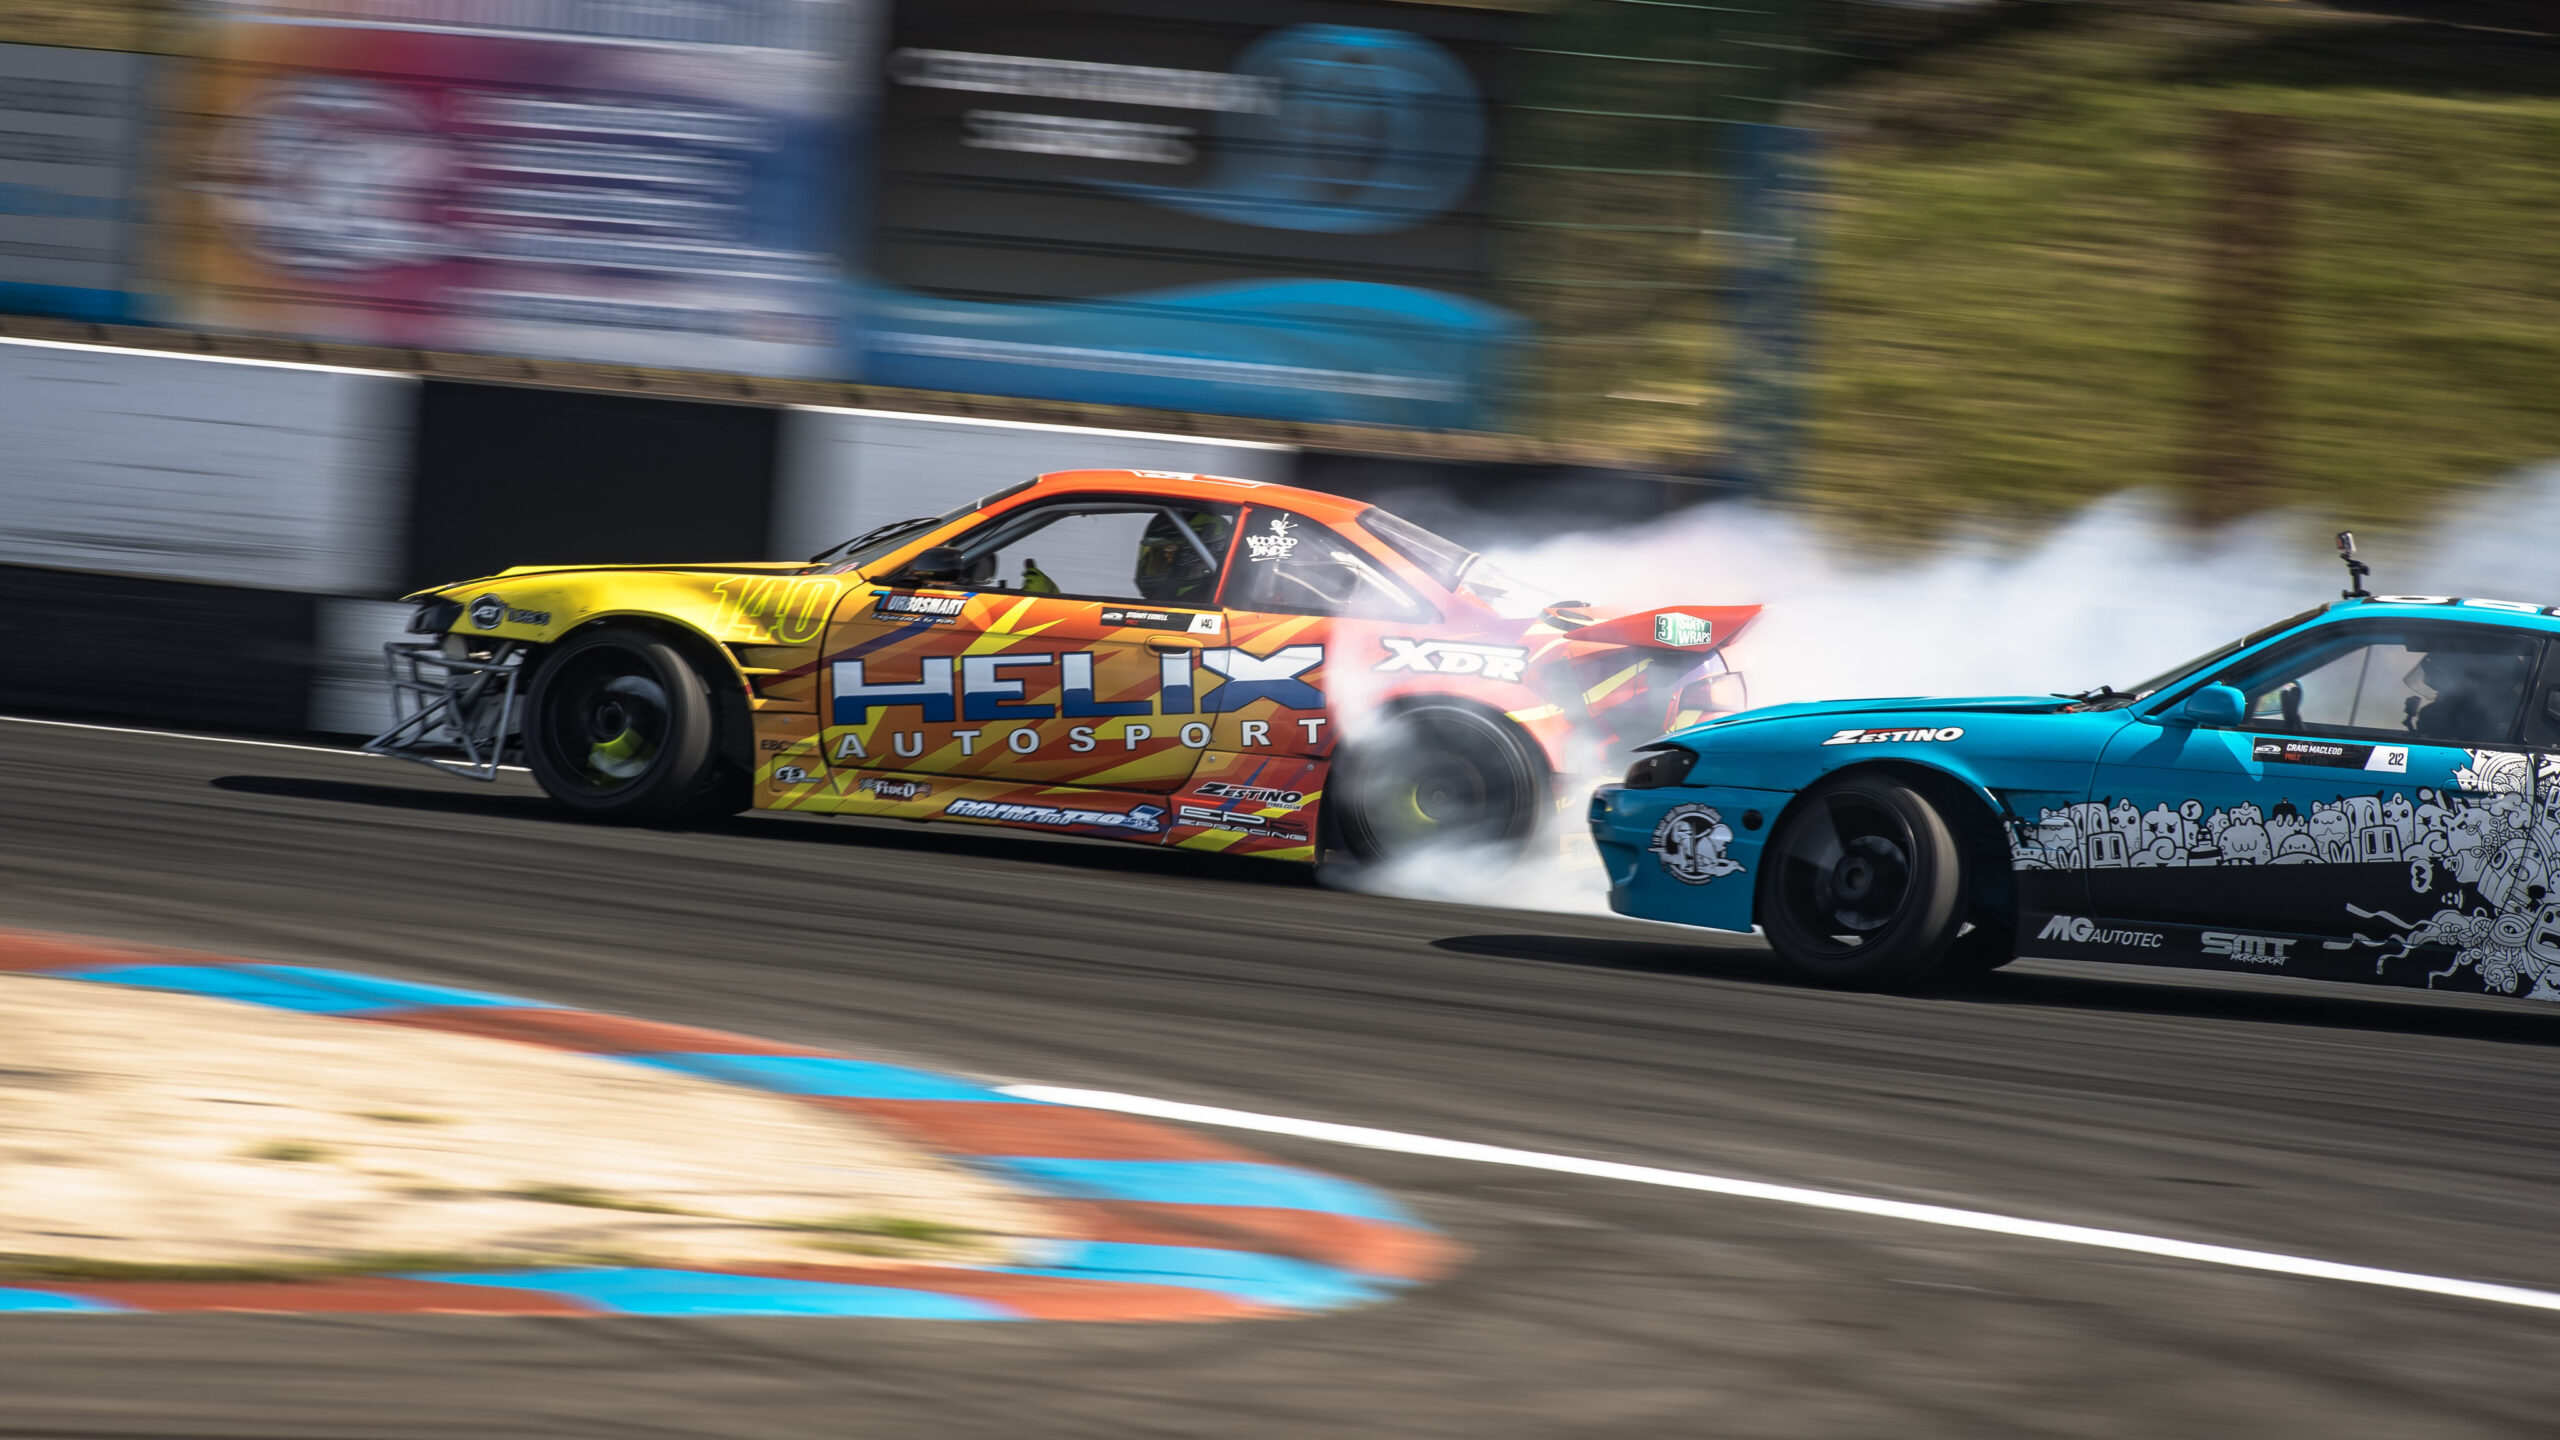 EBC-Equipped Stuart Egdell Competes in Second Round of British Drift Championship